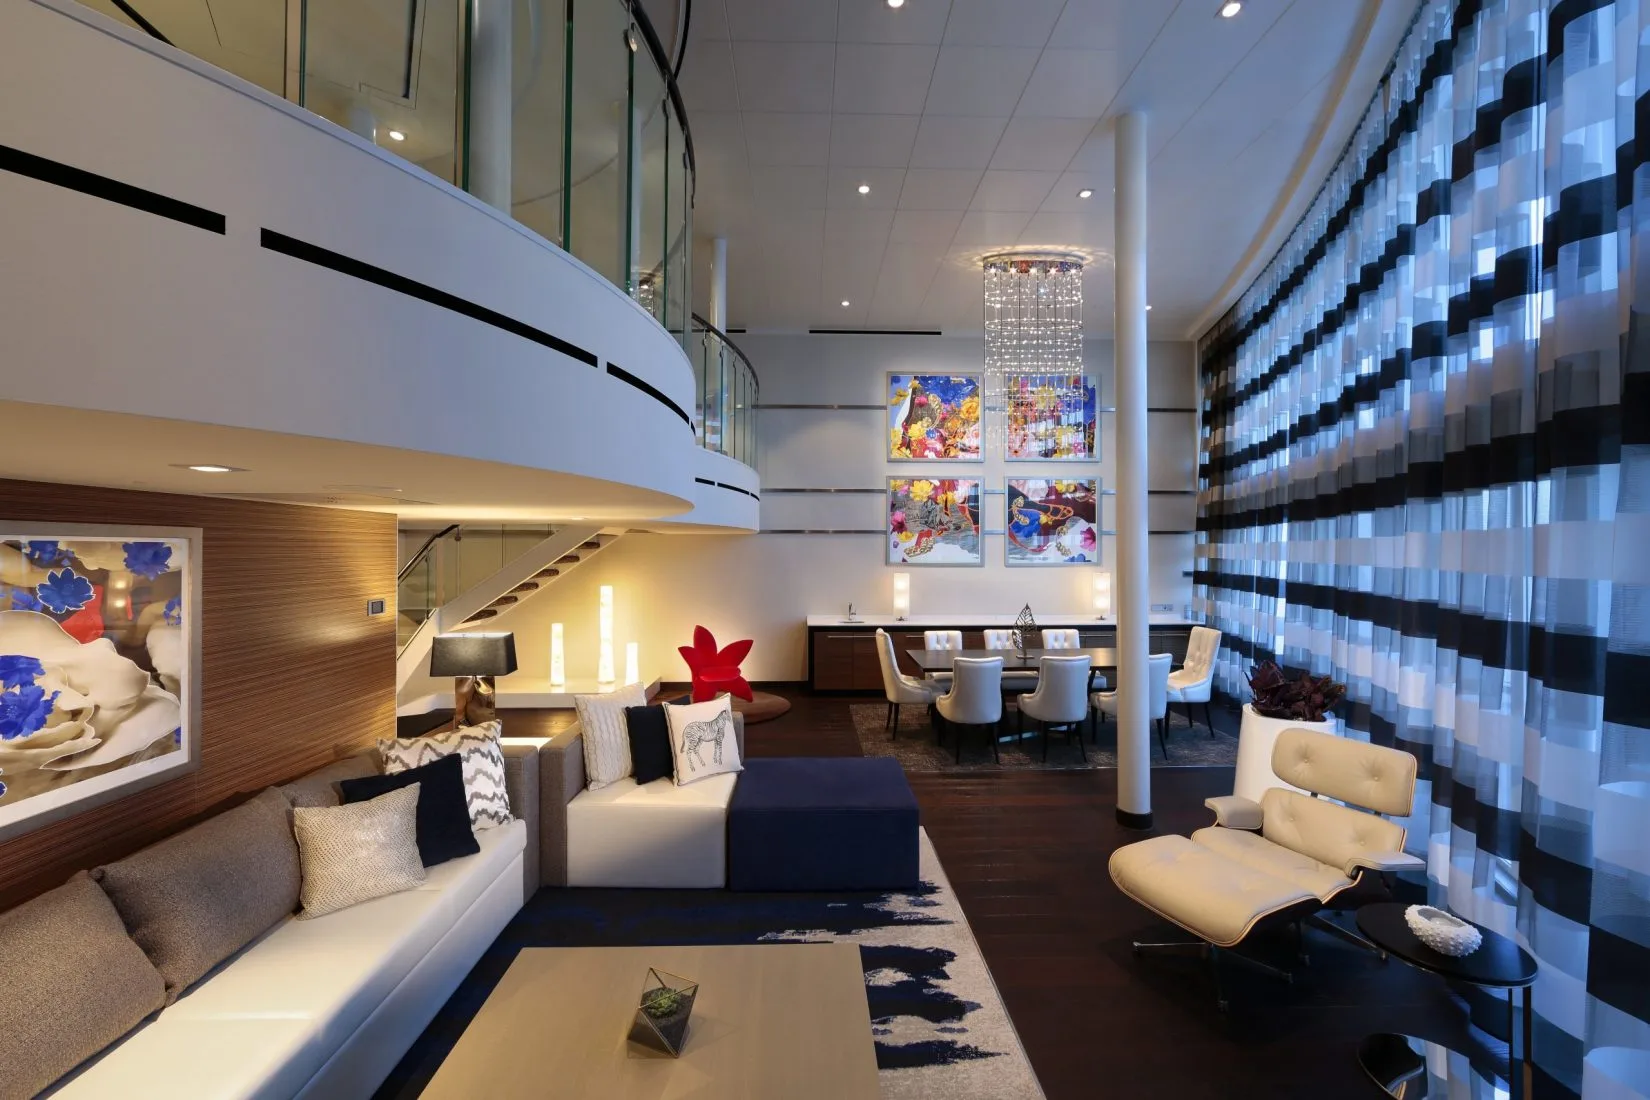 Image of Royal Loft Suite, sourced from: Royal Caribbean International https://touristwire.com/wp-content/uploads/2024/02/1452882971_AN-RoyalLoftSuiteCatRL-scaled-e1619453026869.jpg